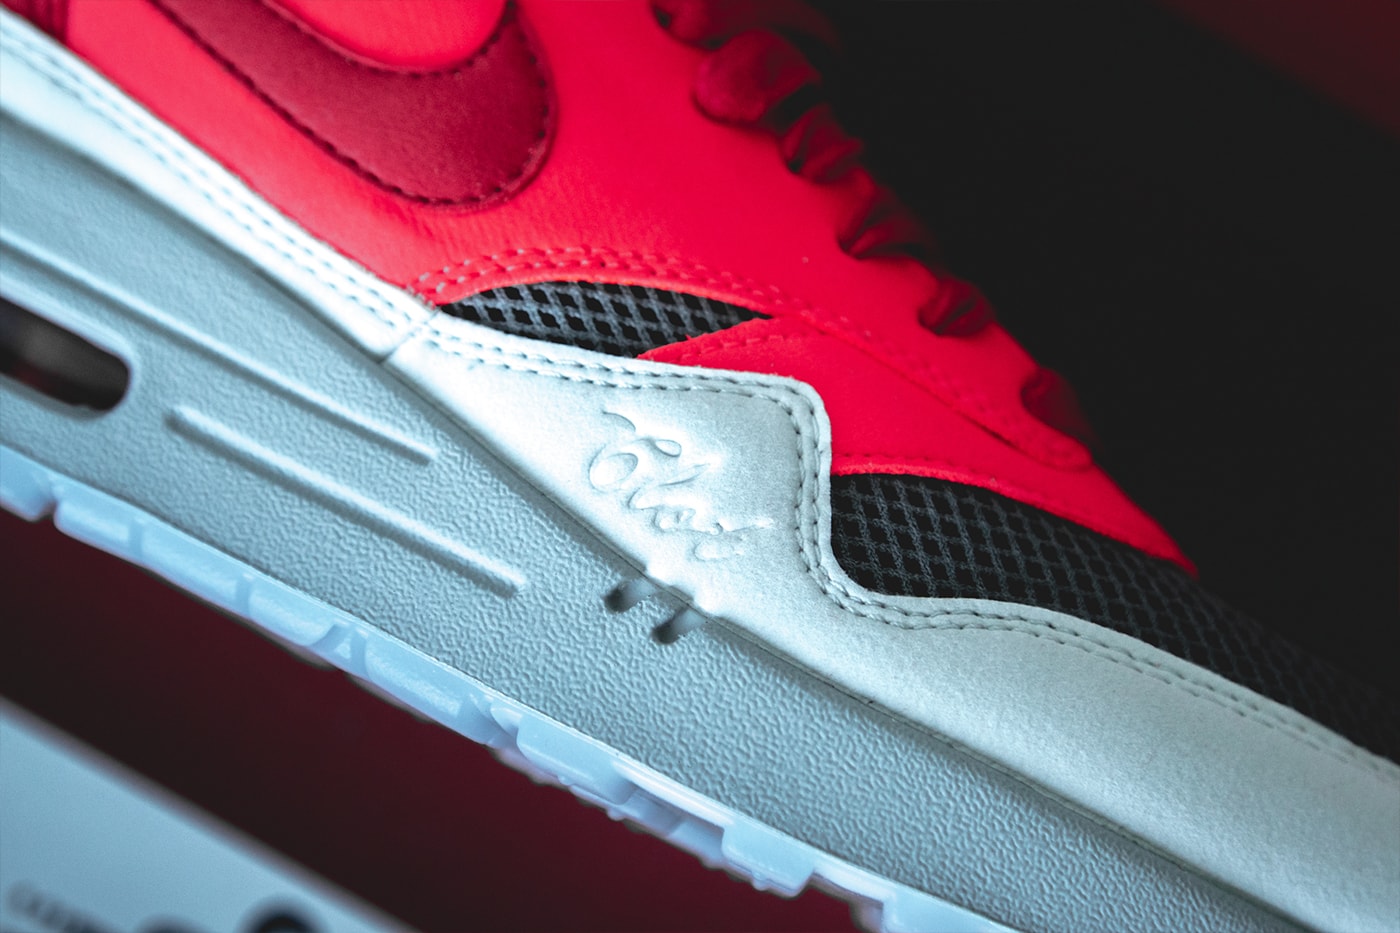 CLOT Nike Air Max 1 K.O.D. Solar Red Closer Look Release Info DD1870-600 Kevin Poon Edison Chen